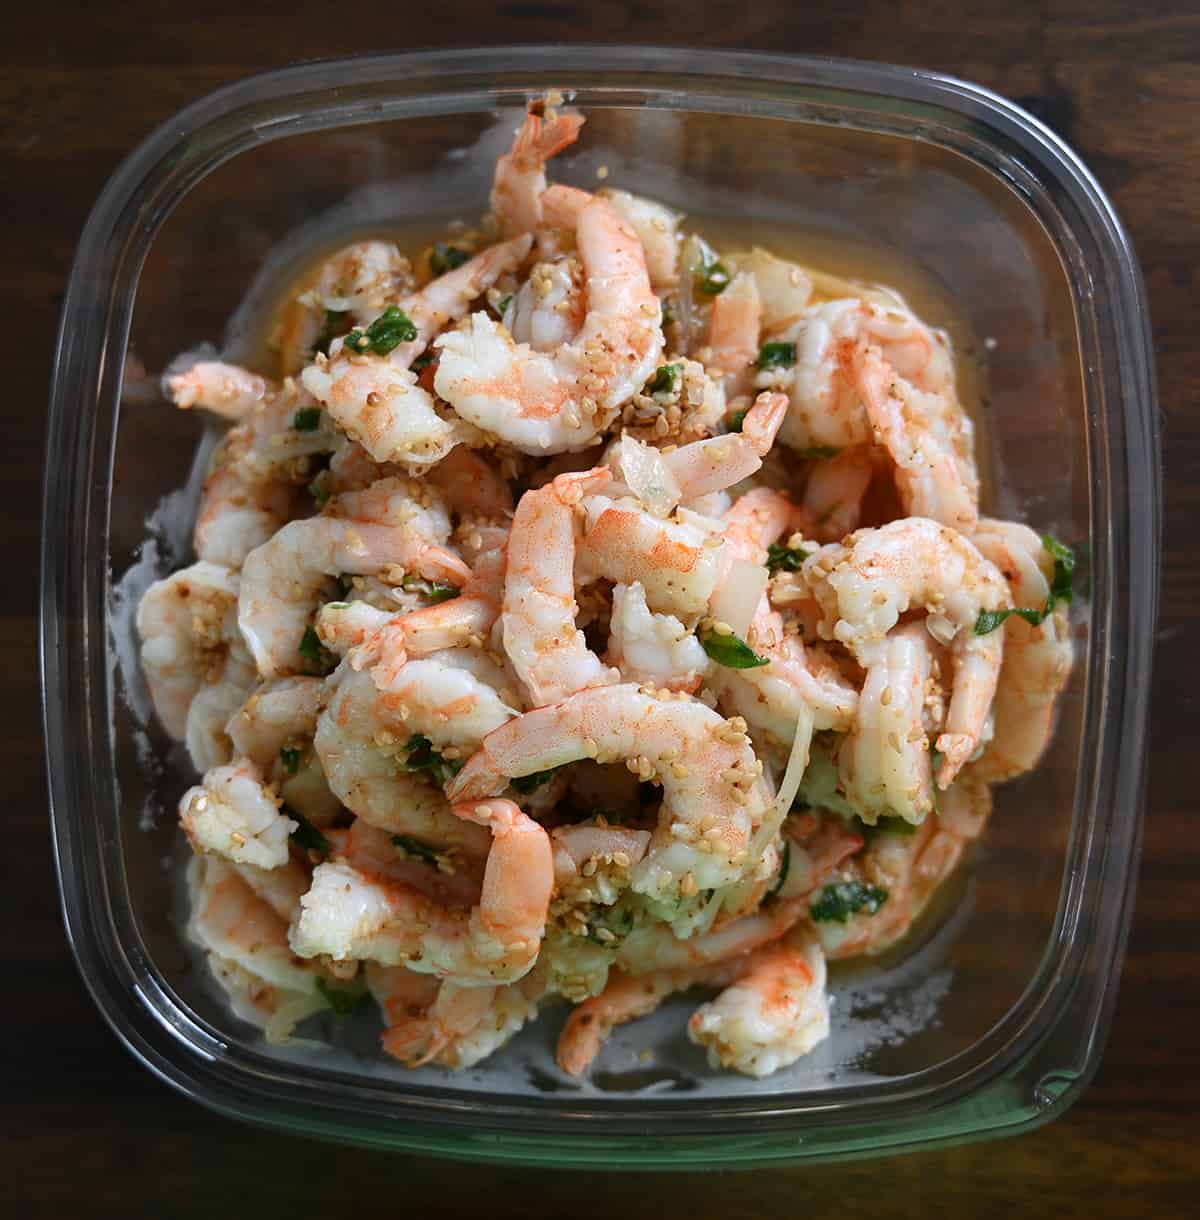 Top down image of an open container of the Garlic Shrimp Poke. There are sesame seeds covering the poke.